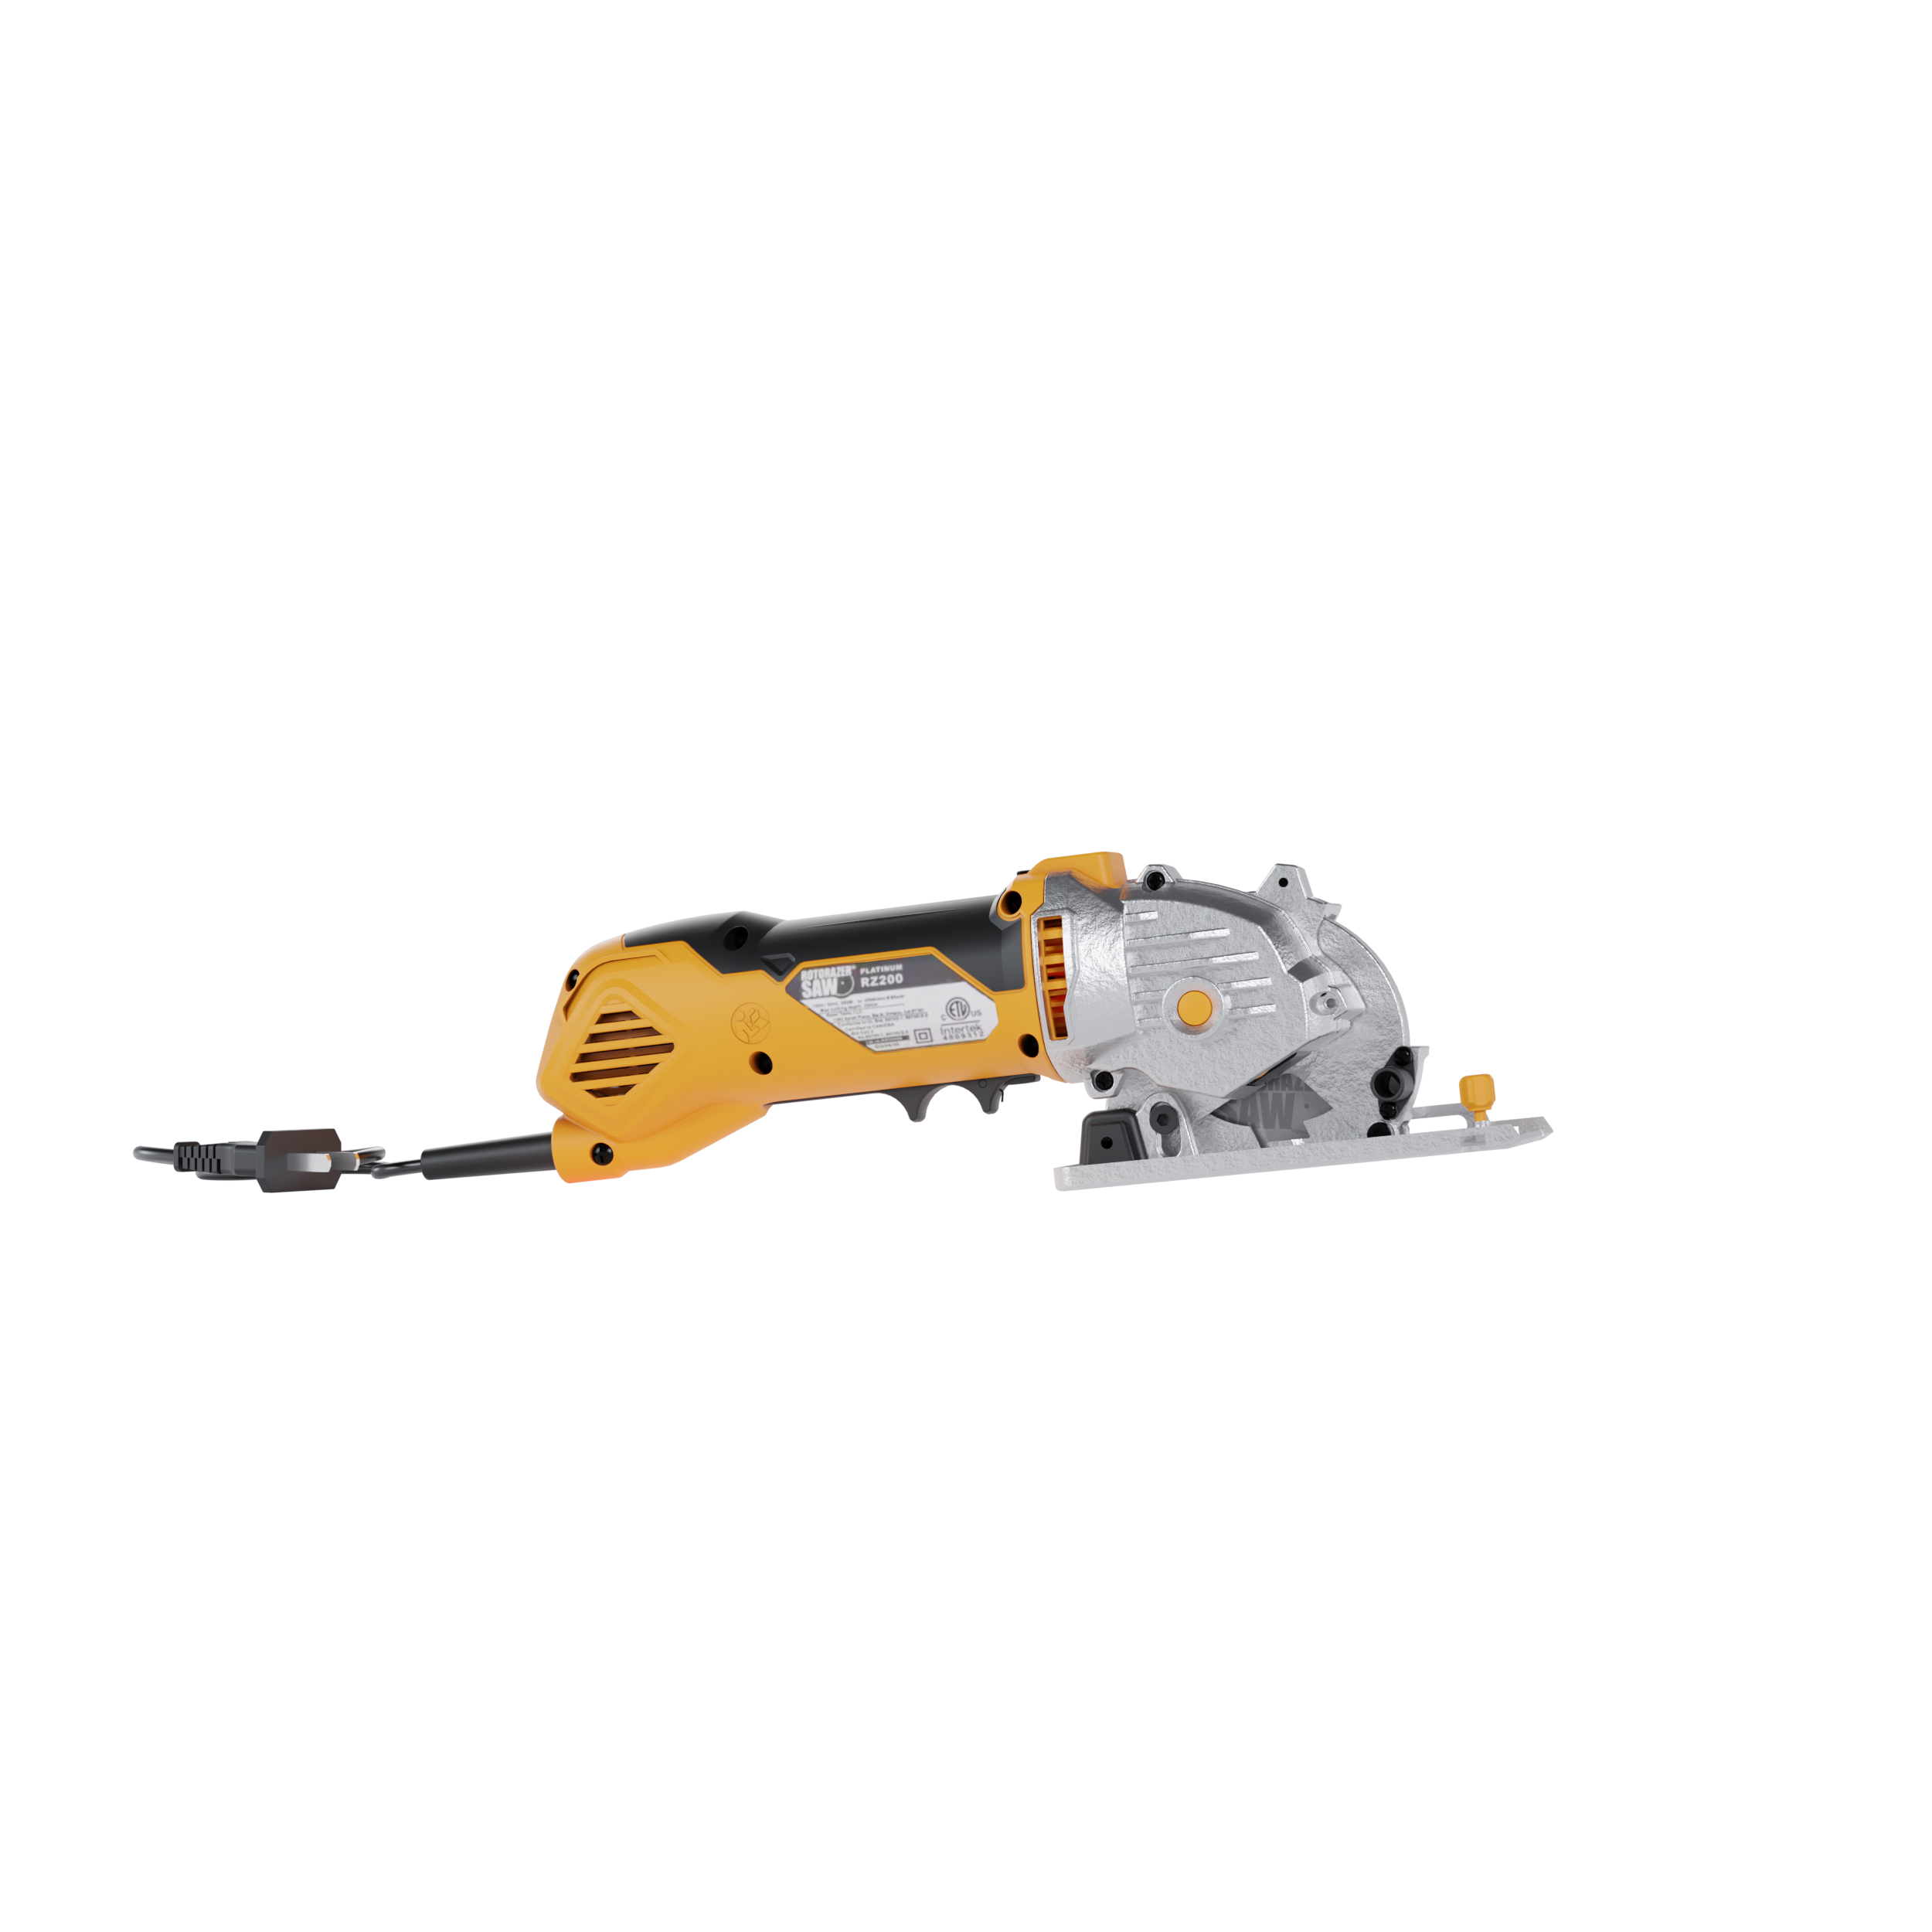 Rotorazer is the all-in-one saw that does it all! 7 different saws